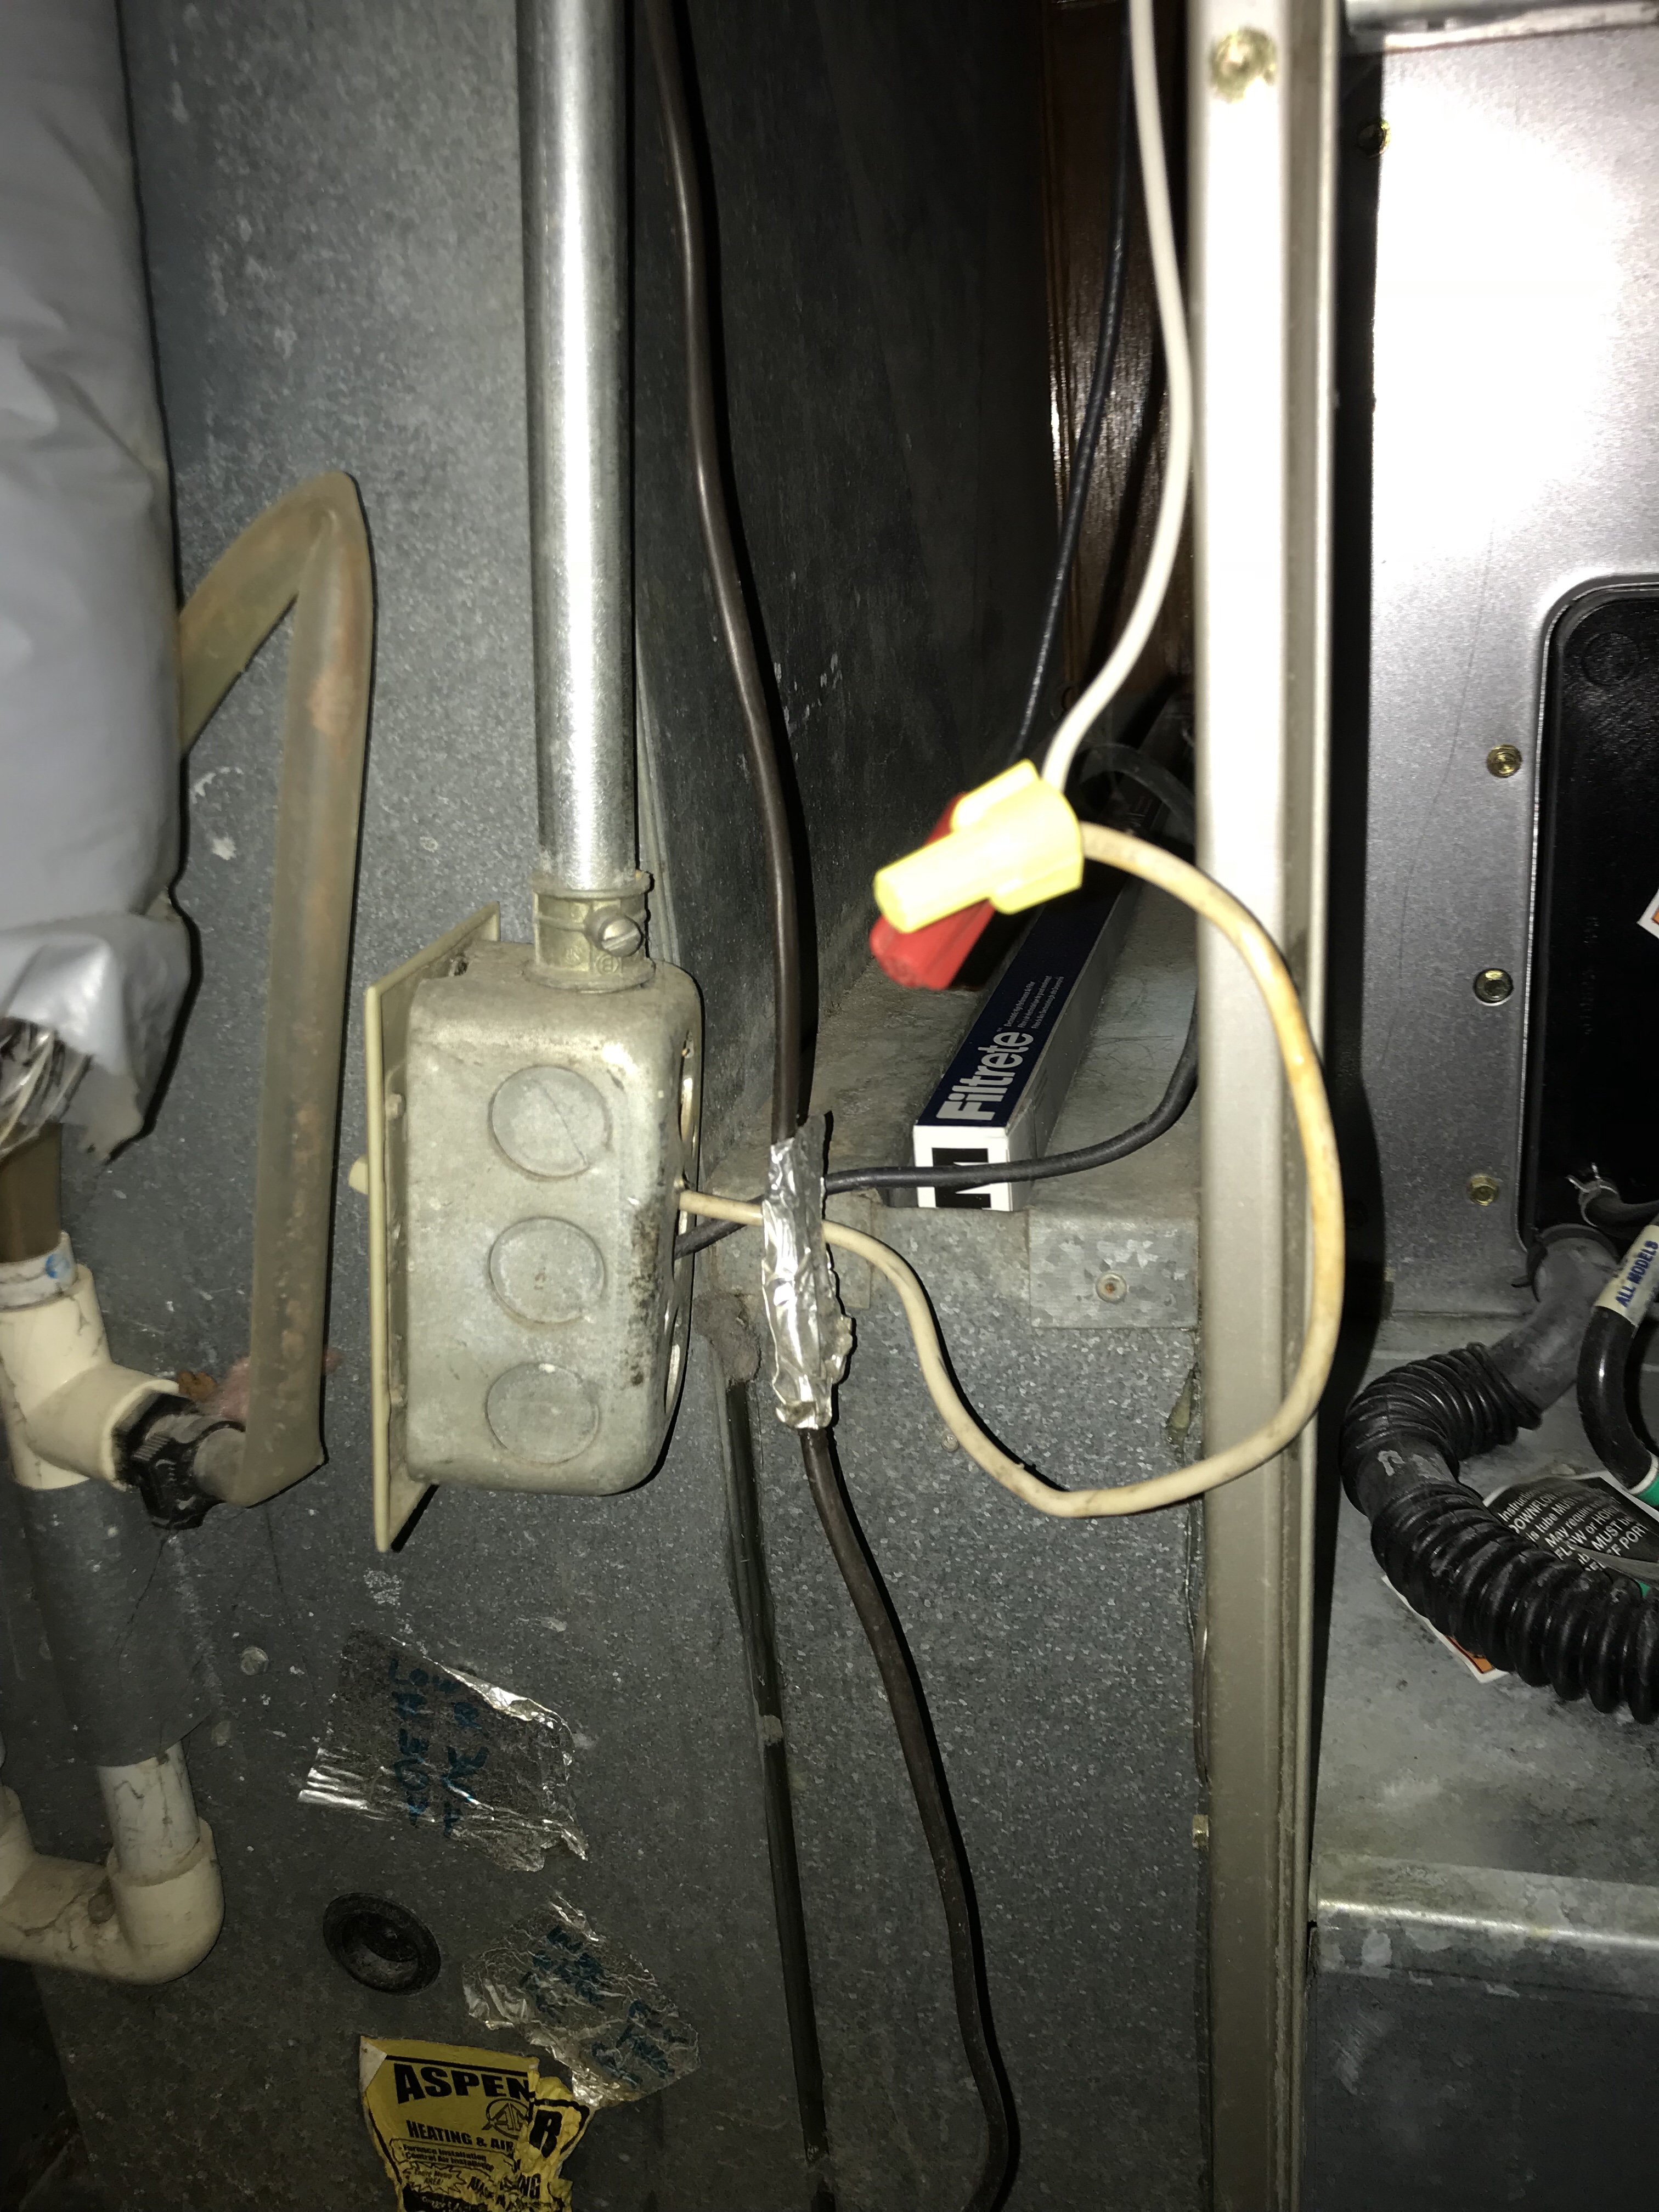 Not the right way to wire a furnace